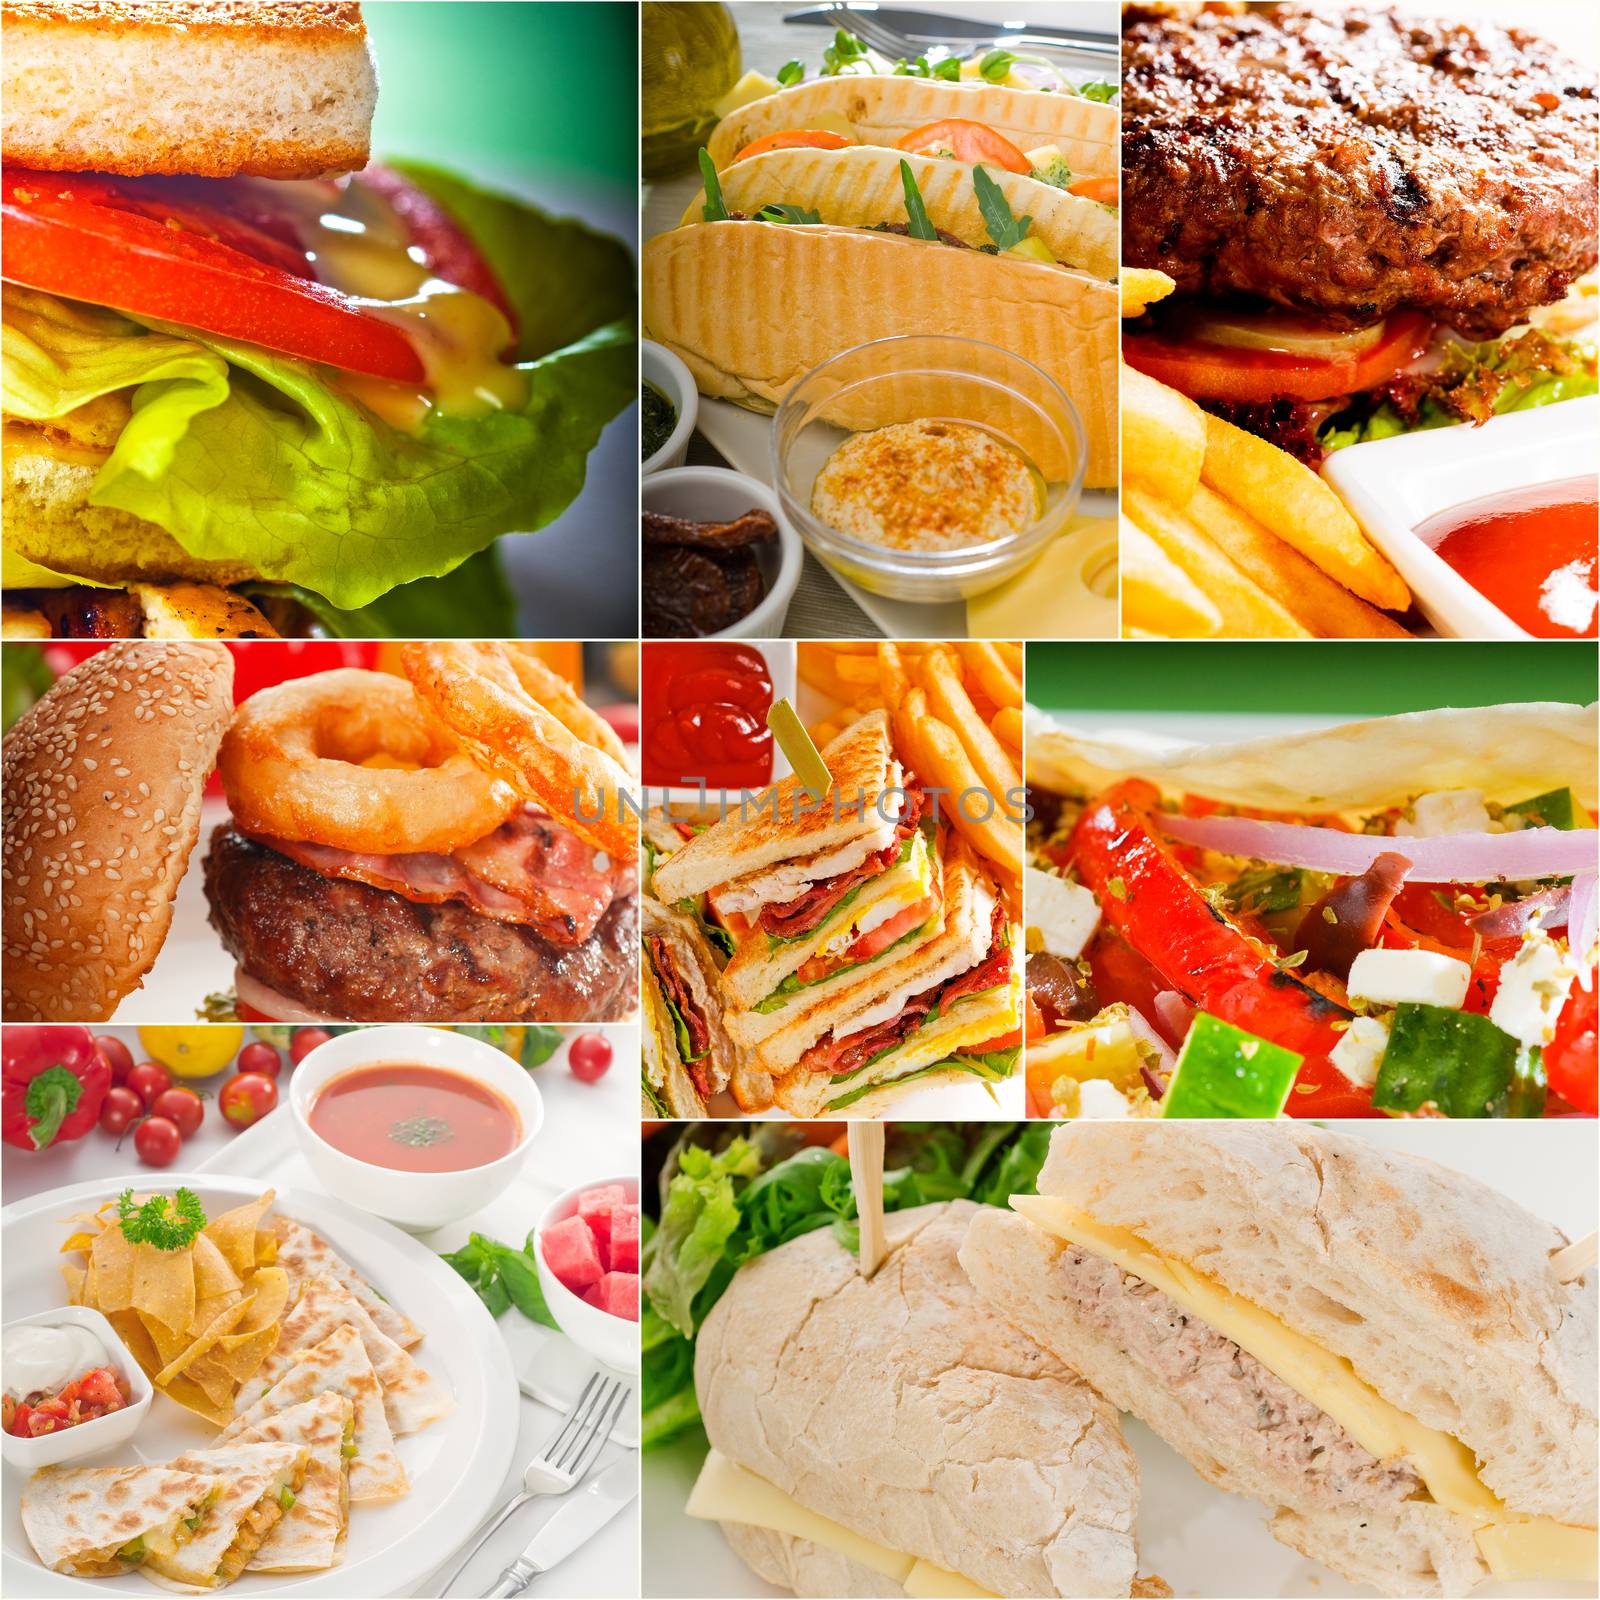 burgers and sandwiches collection on a collage by keko64